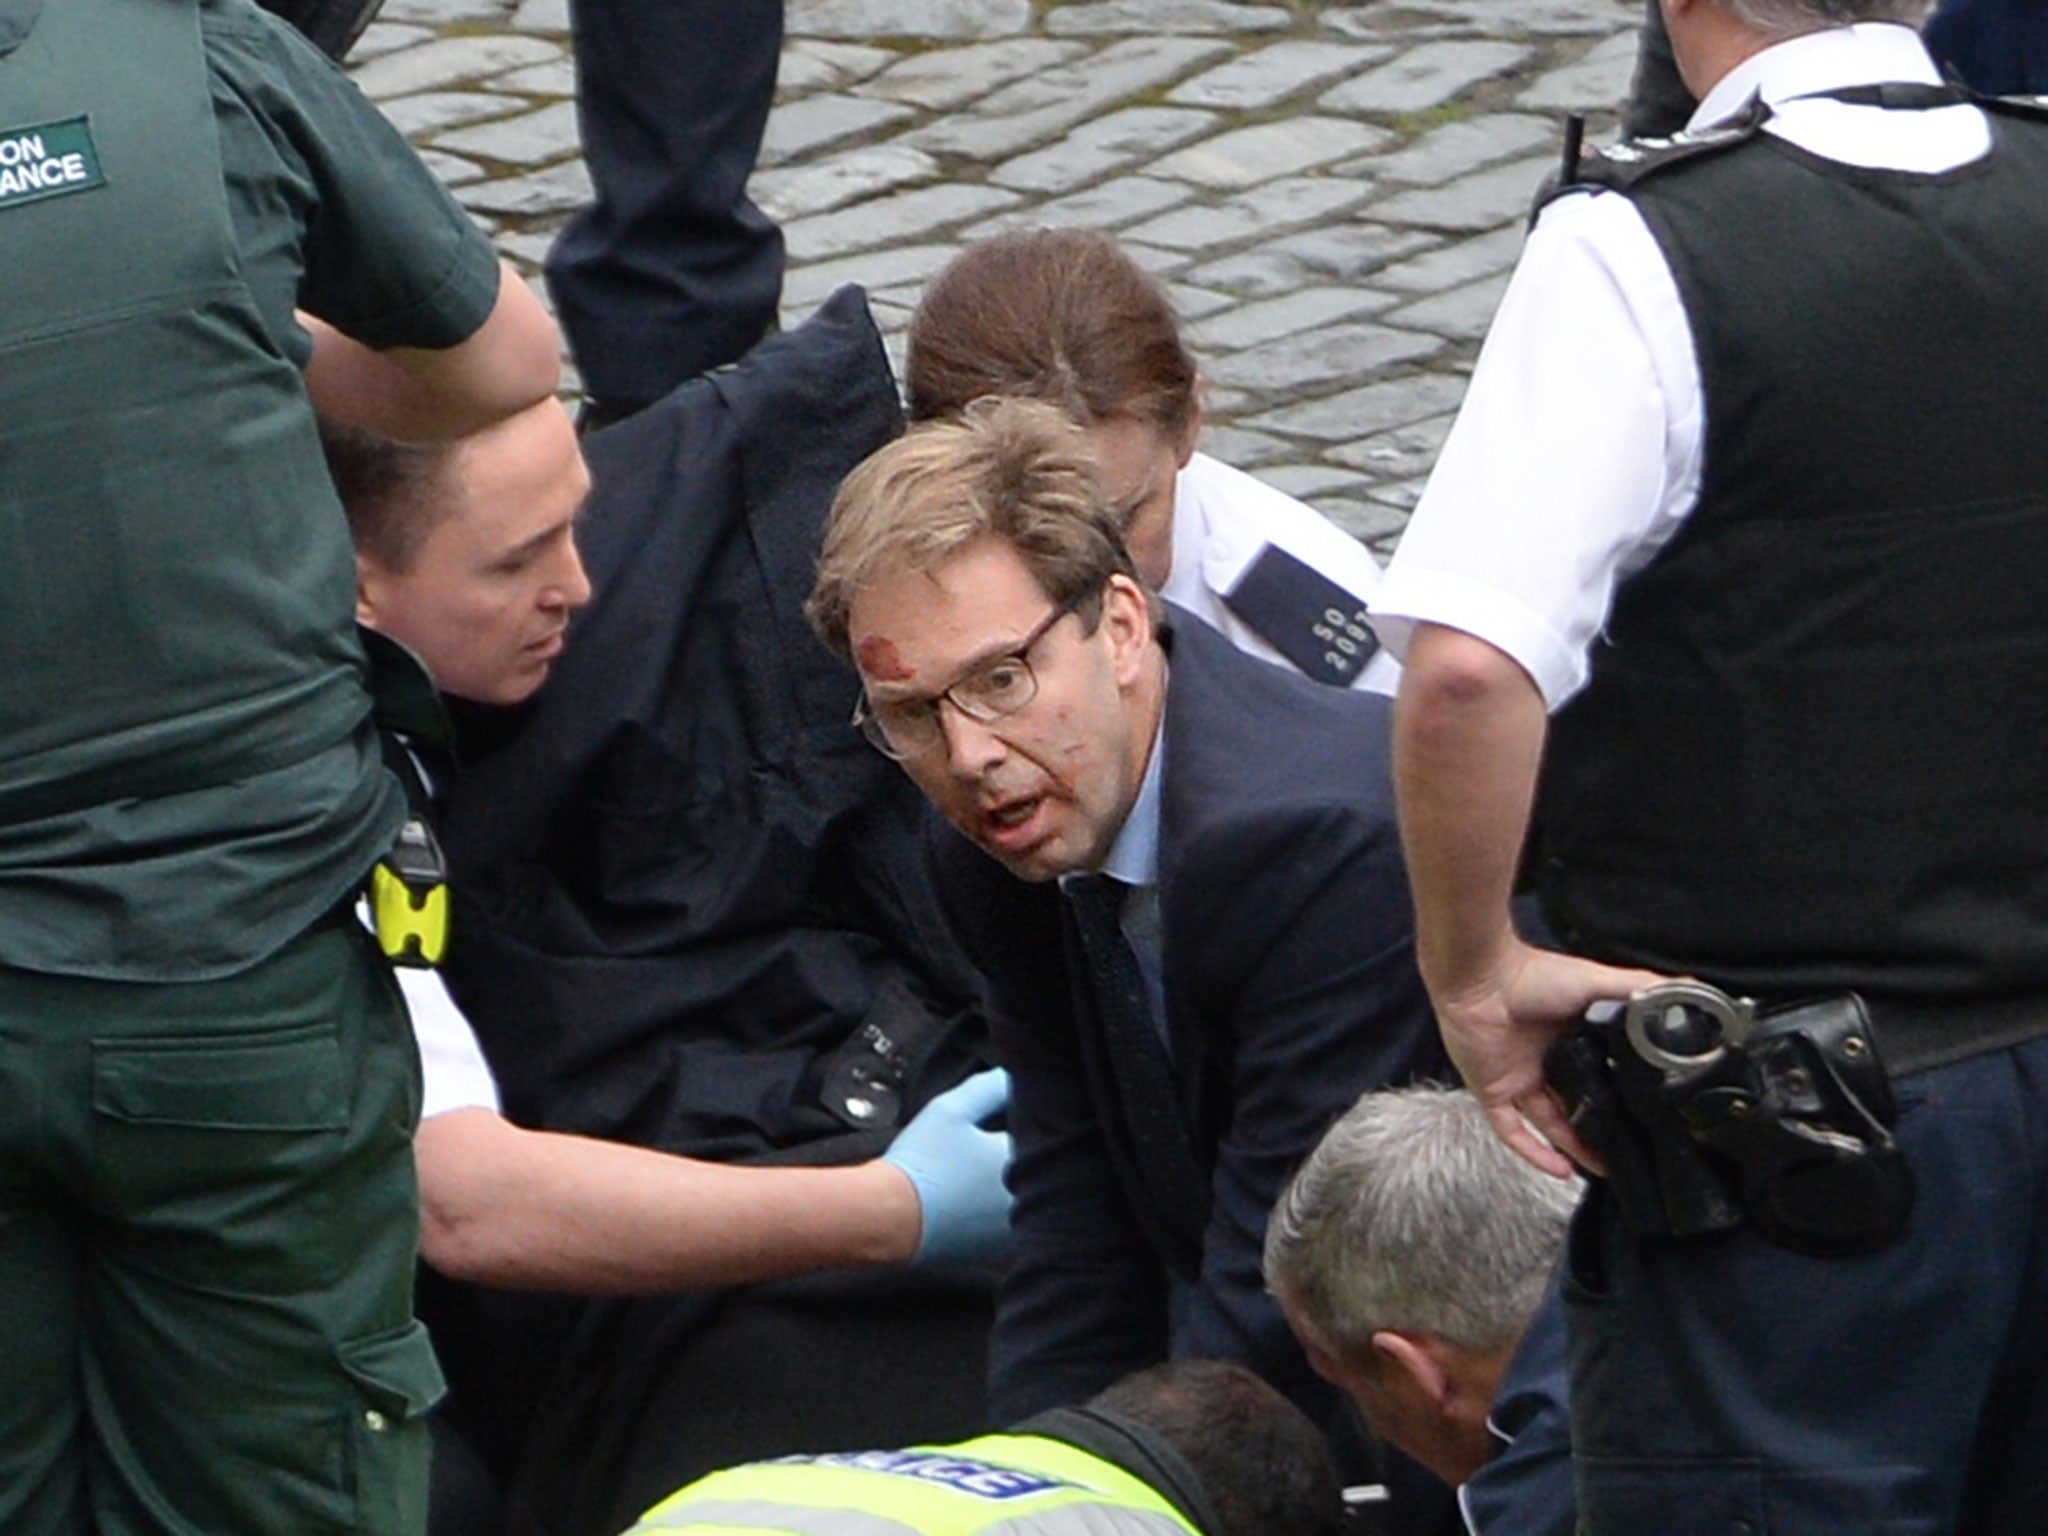 MP Tobias Ellwood performing first aid on PC Keith Palmer after the officer was fatally stabbed during the Westminster attack